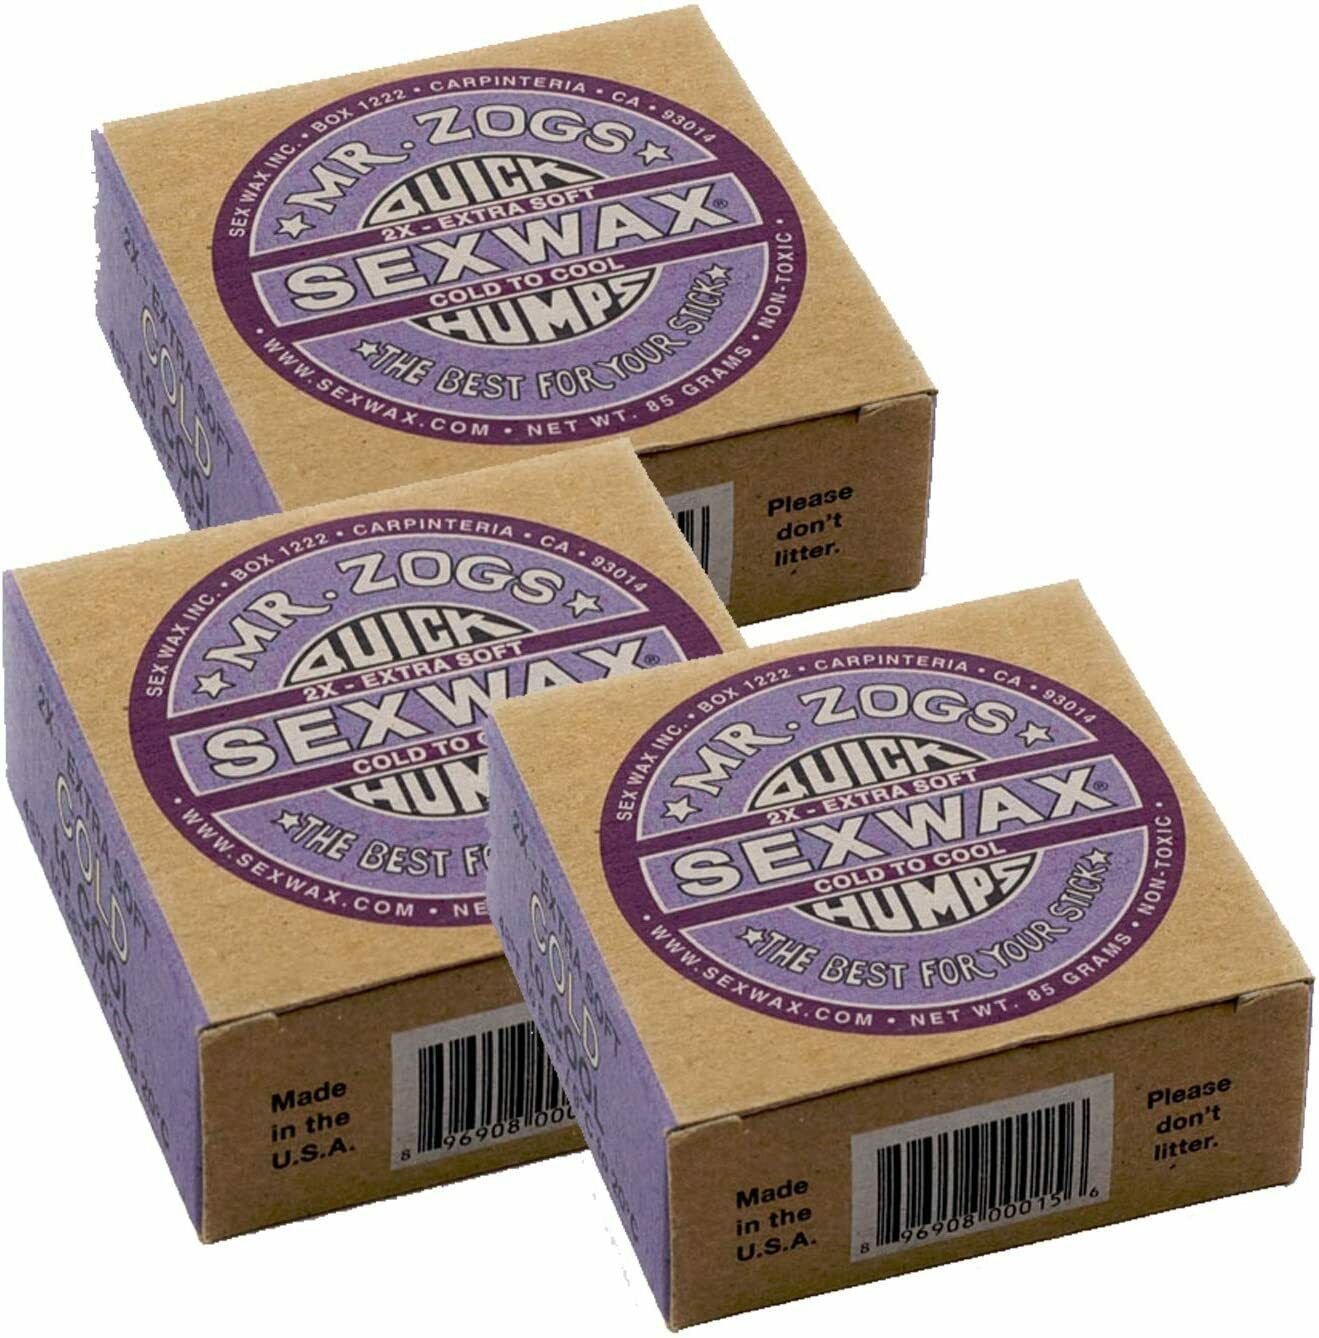 Mr. Zogs Sex Wax Quick Humps - 2x Cool/cold 3 Pack